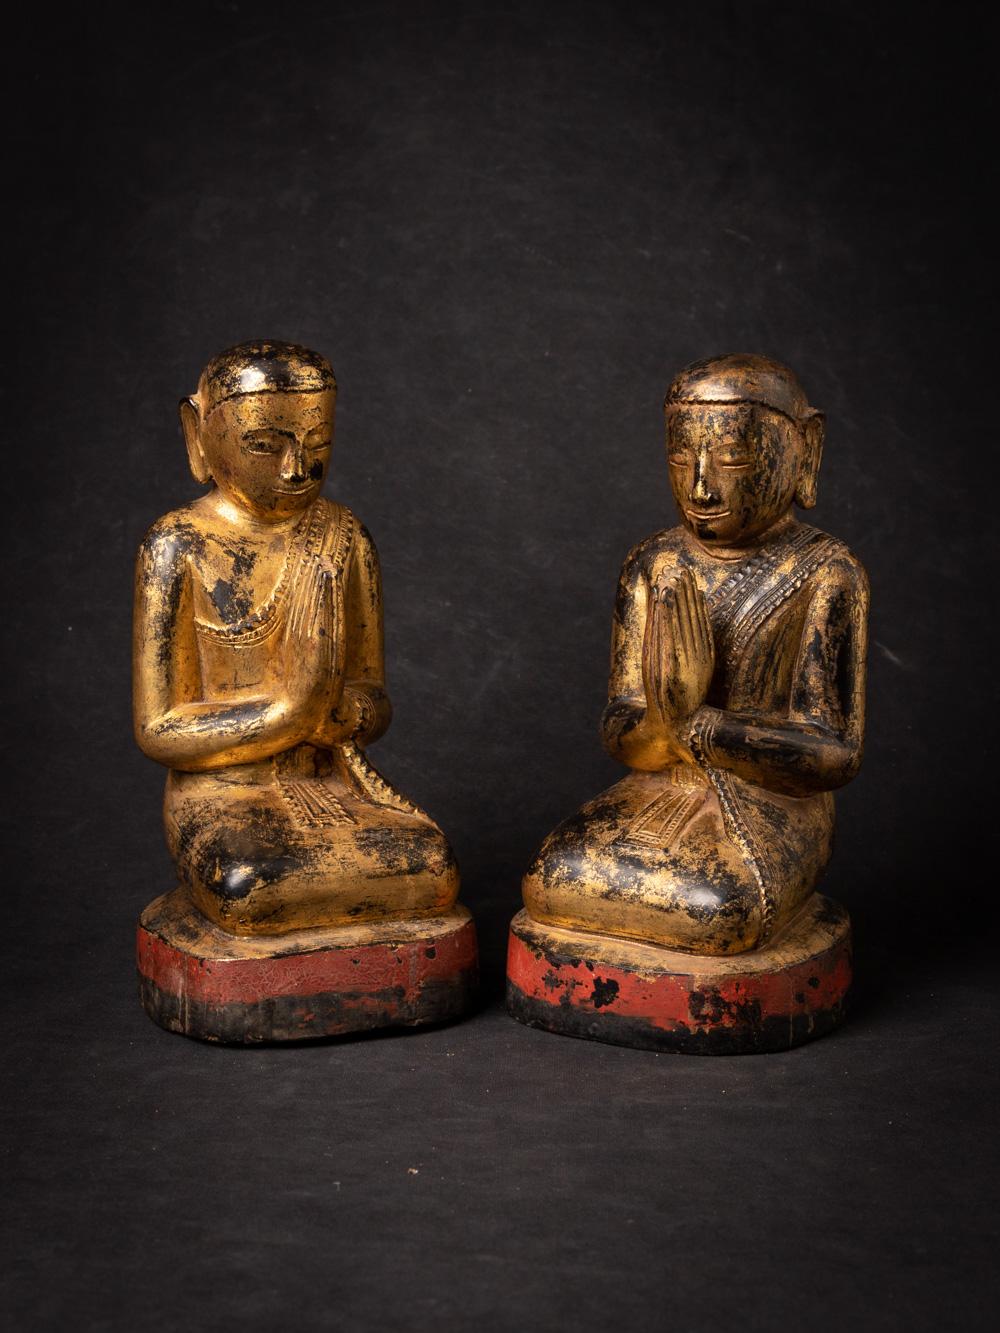 The pair of antique wooden Burmese Monk statues is a remarkable and spiritually significant artifact originating from Burma. Crafted from wood and gilded with 24-karat gold, each statue stands at 25 cm in height and measures 12.3 cm in width and